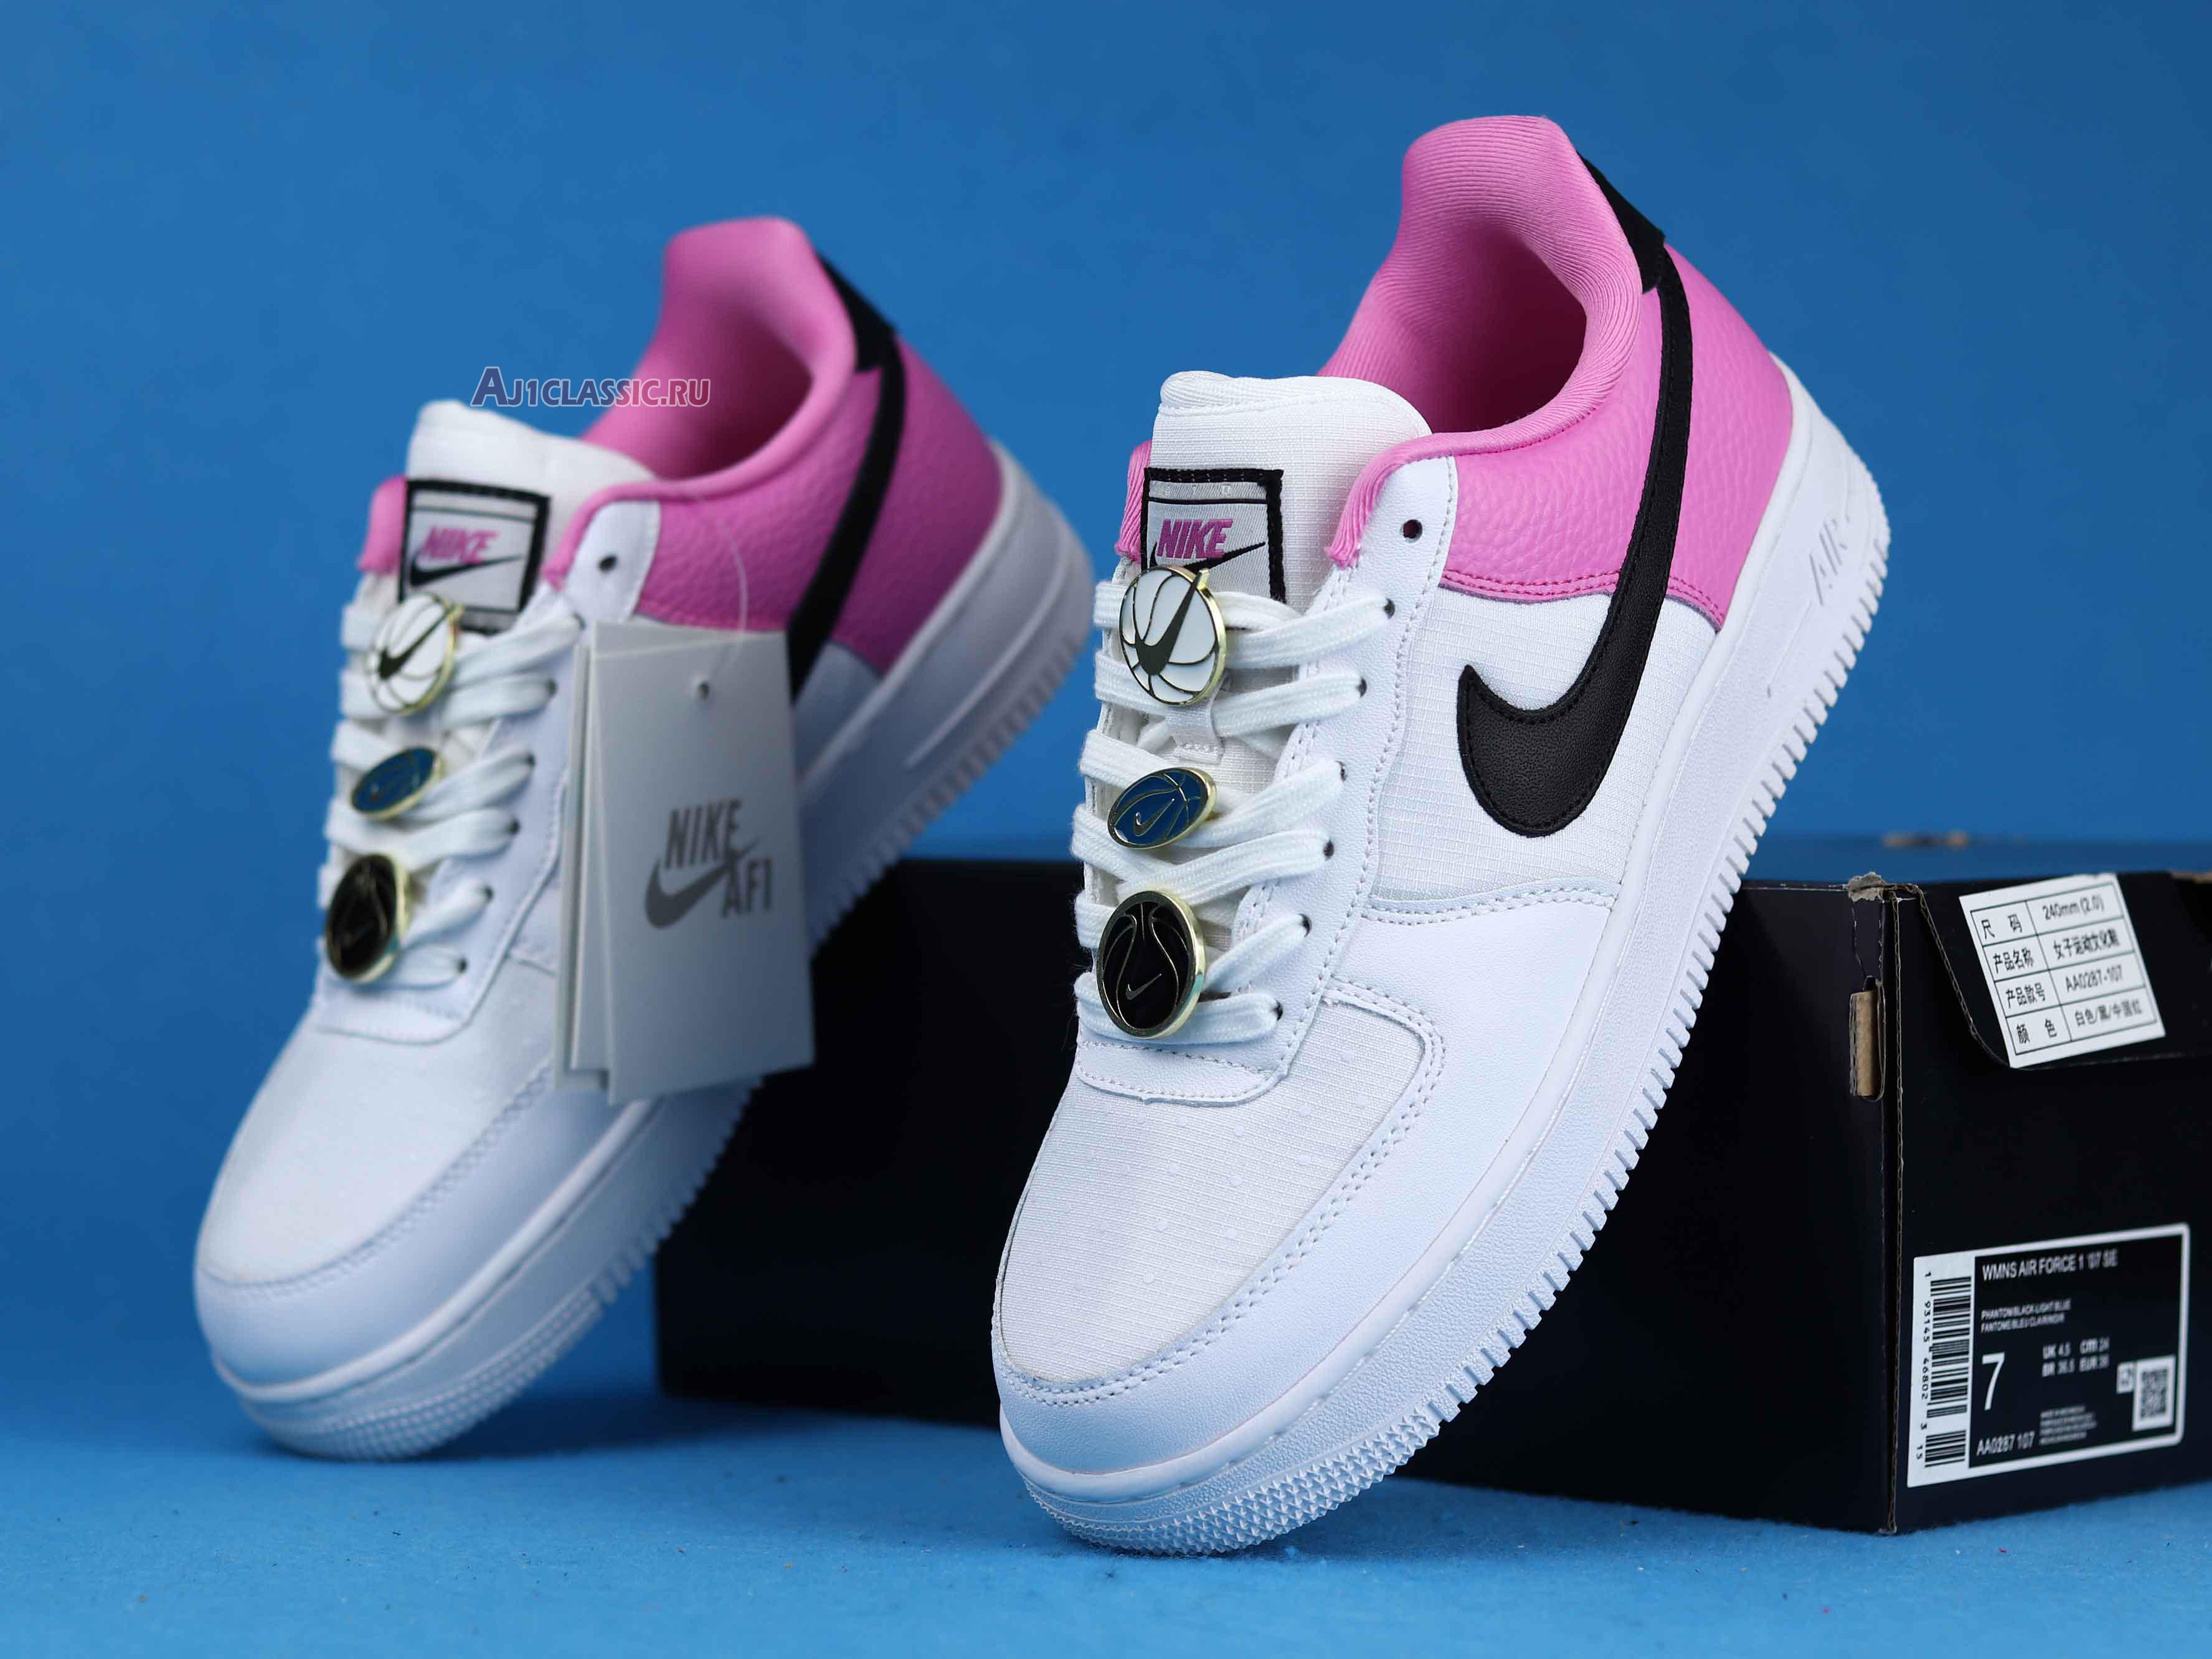 Nike Wmns Air Force 1 Low SE Basketball Pins AA0287-107 White/Black-China Rose Sneakers